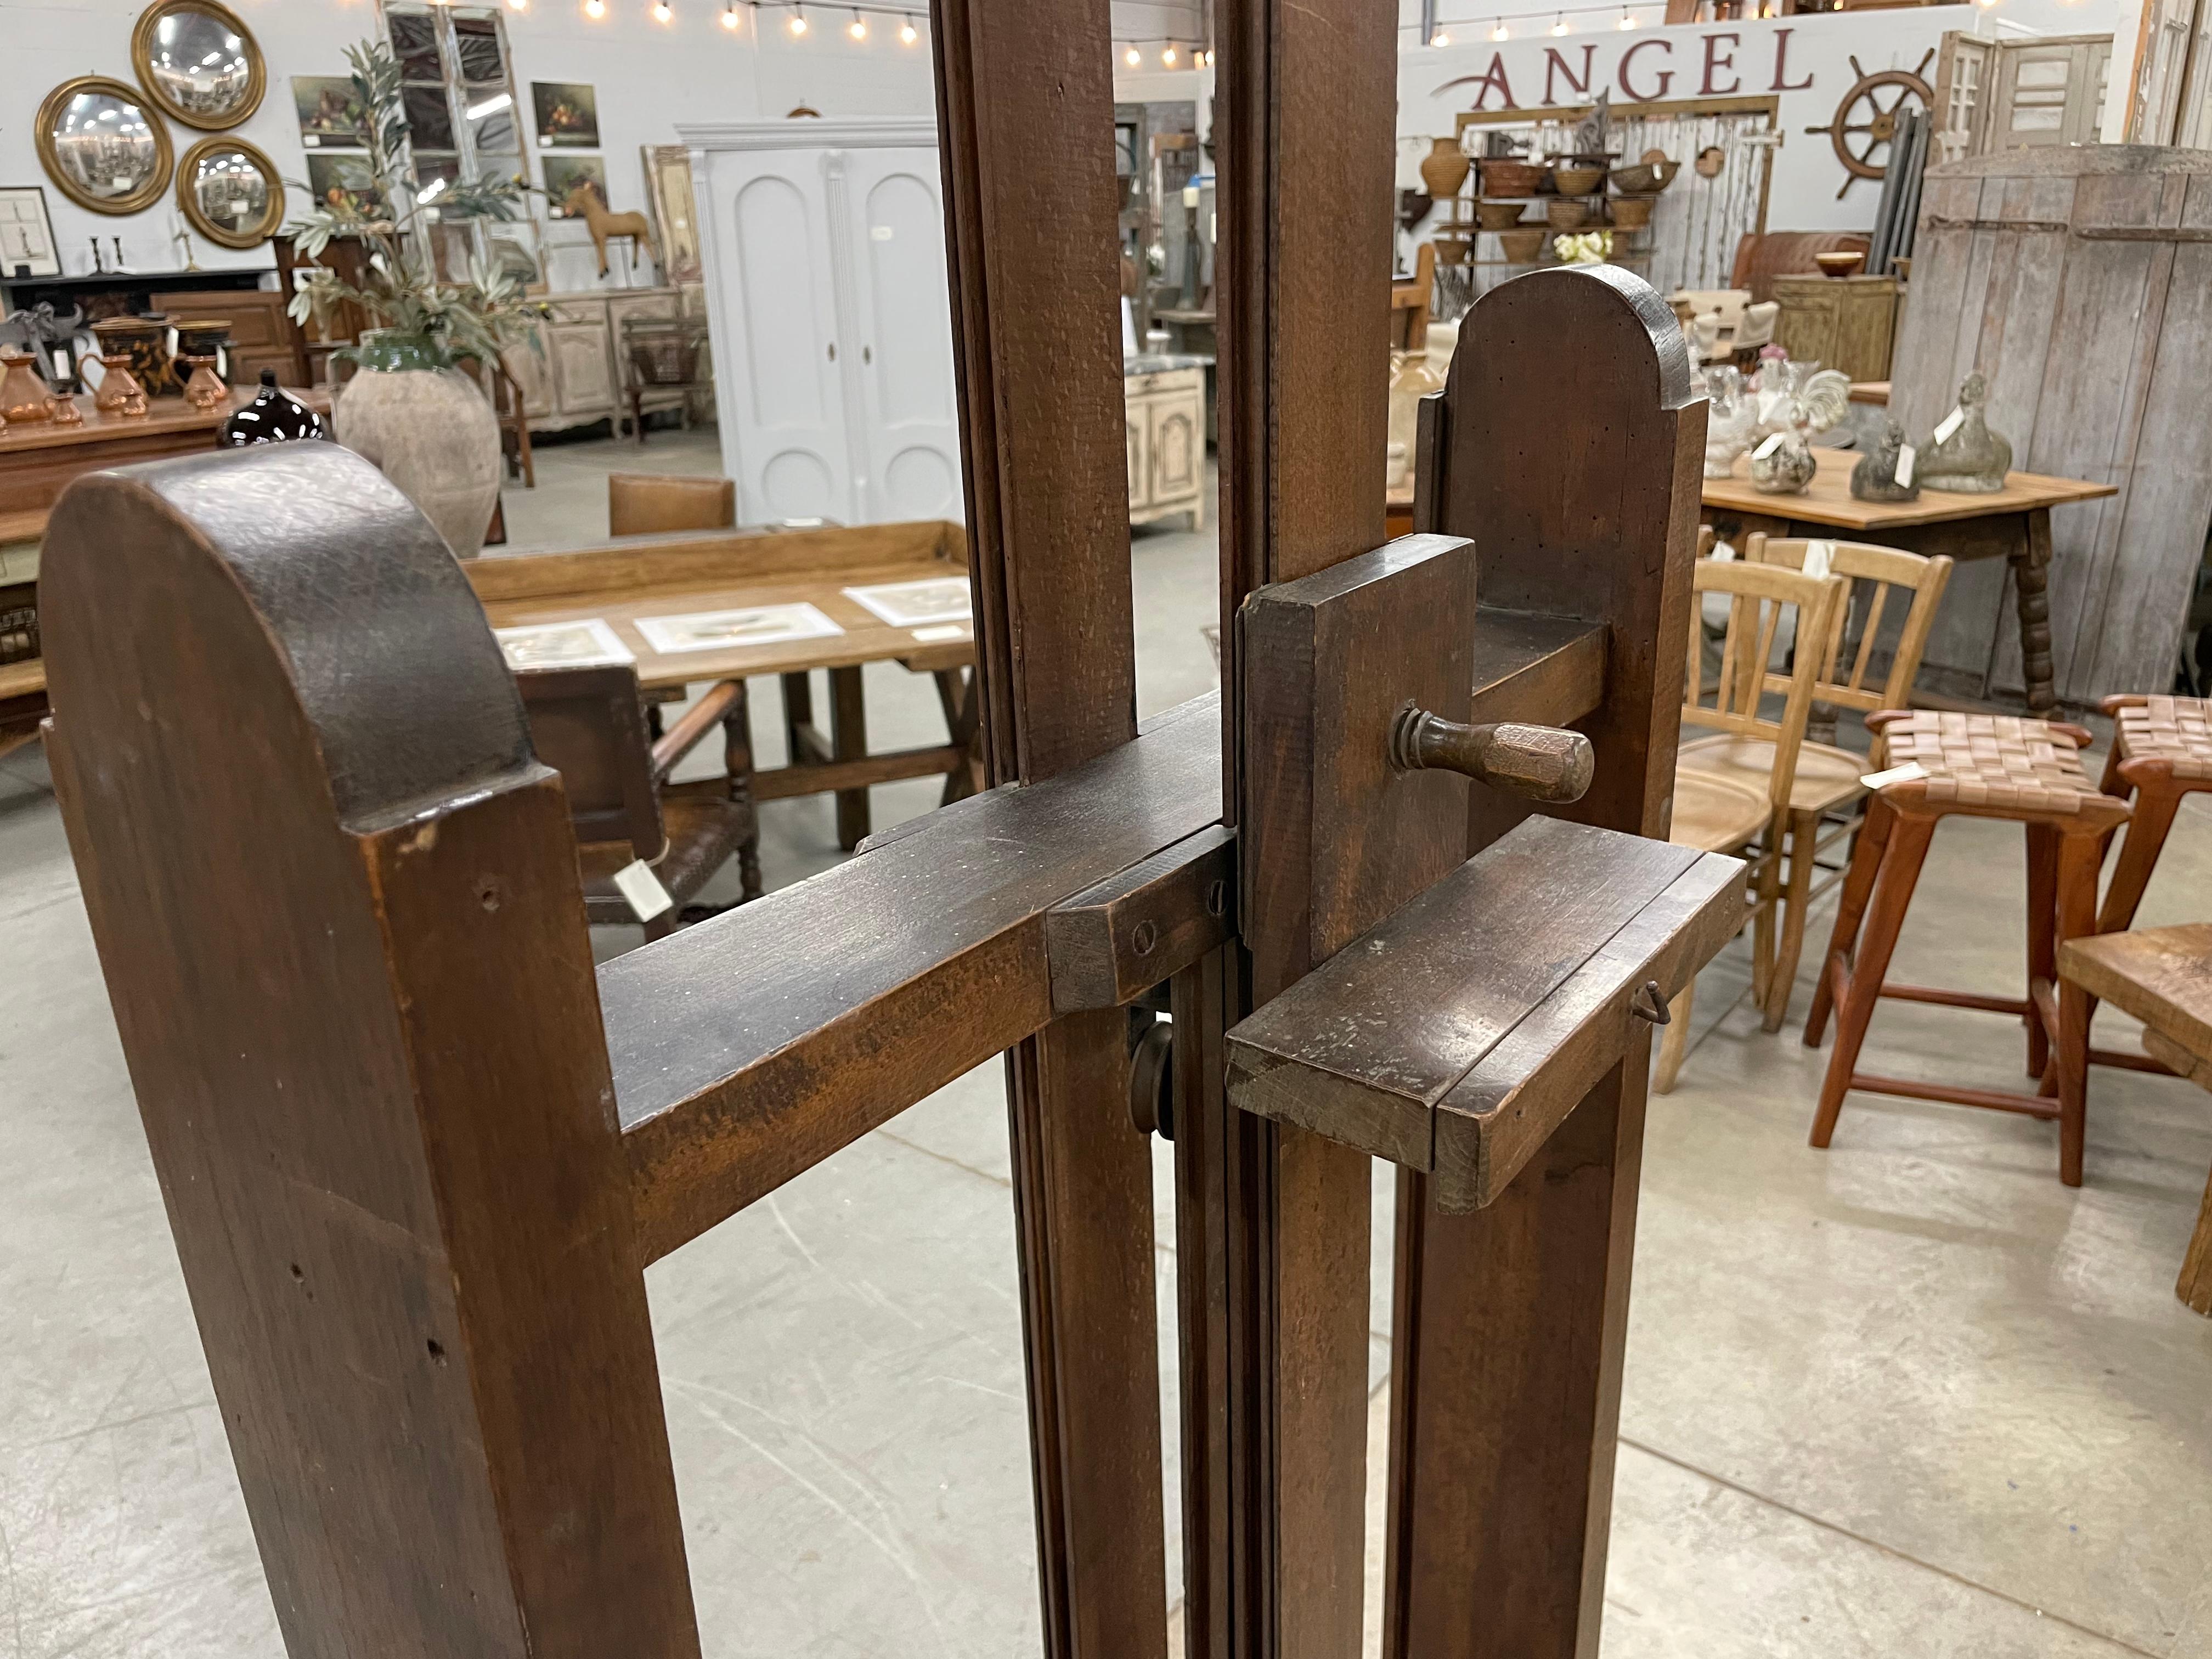 Antique French Double Sided Artist Easel In Good Condition For Sale In Calgary, Alberta